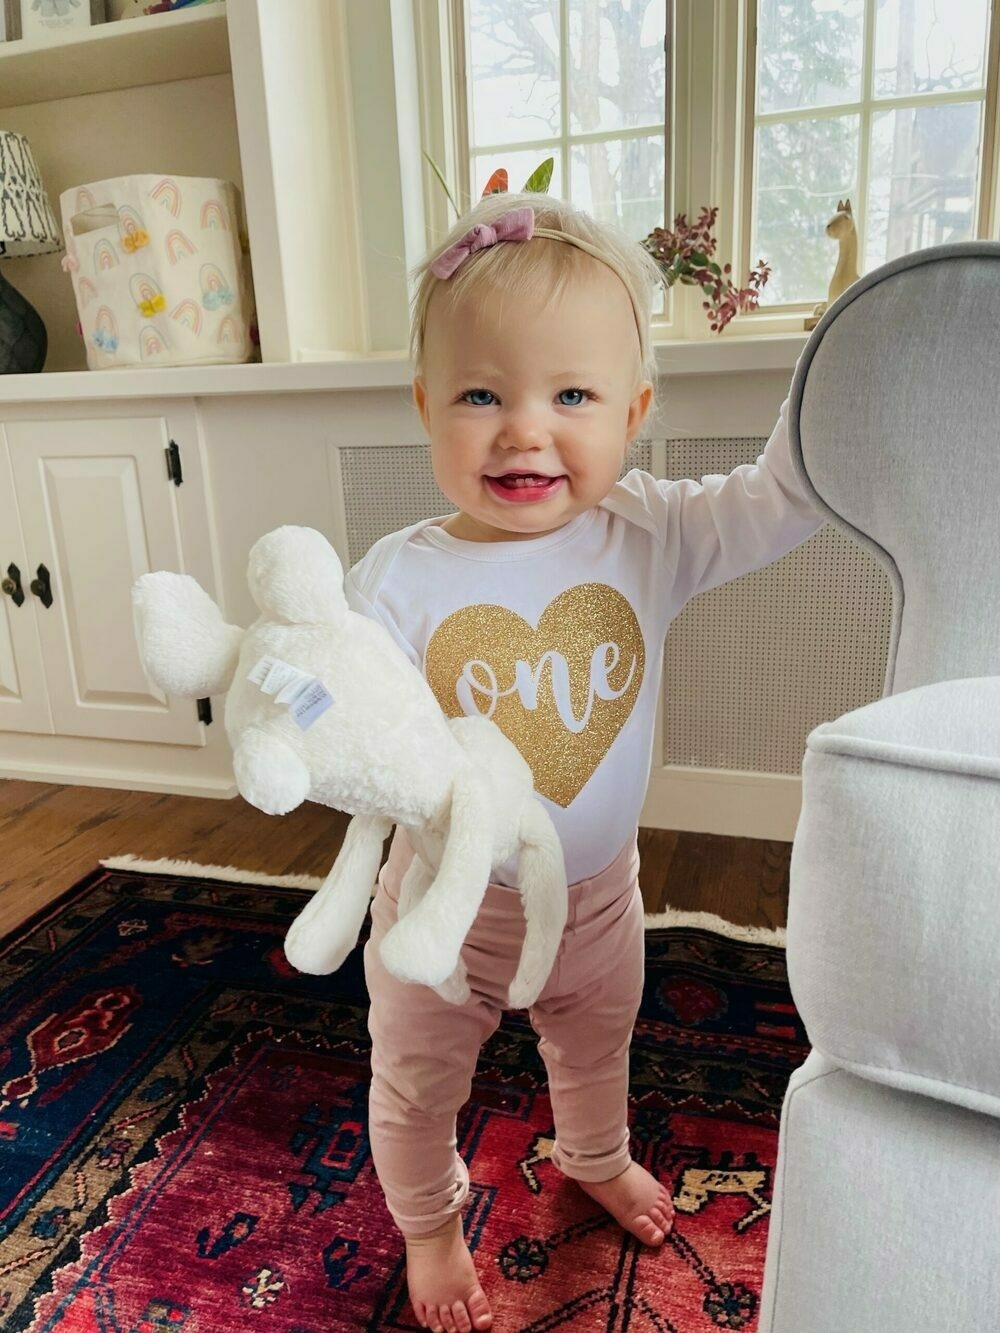 My one-year old daughter in her birthday shirt